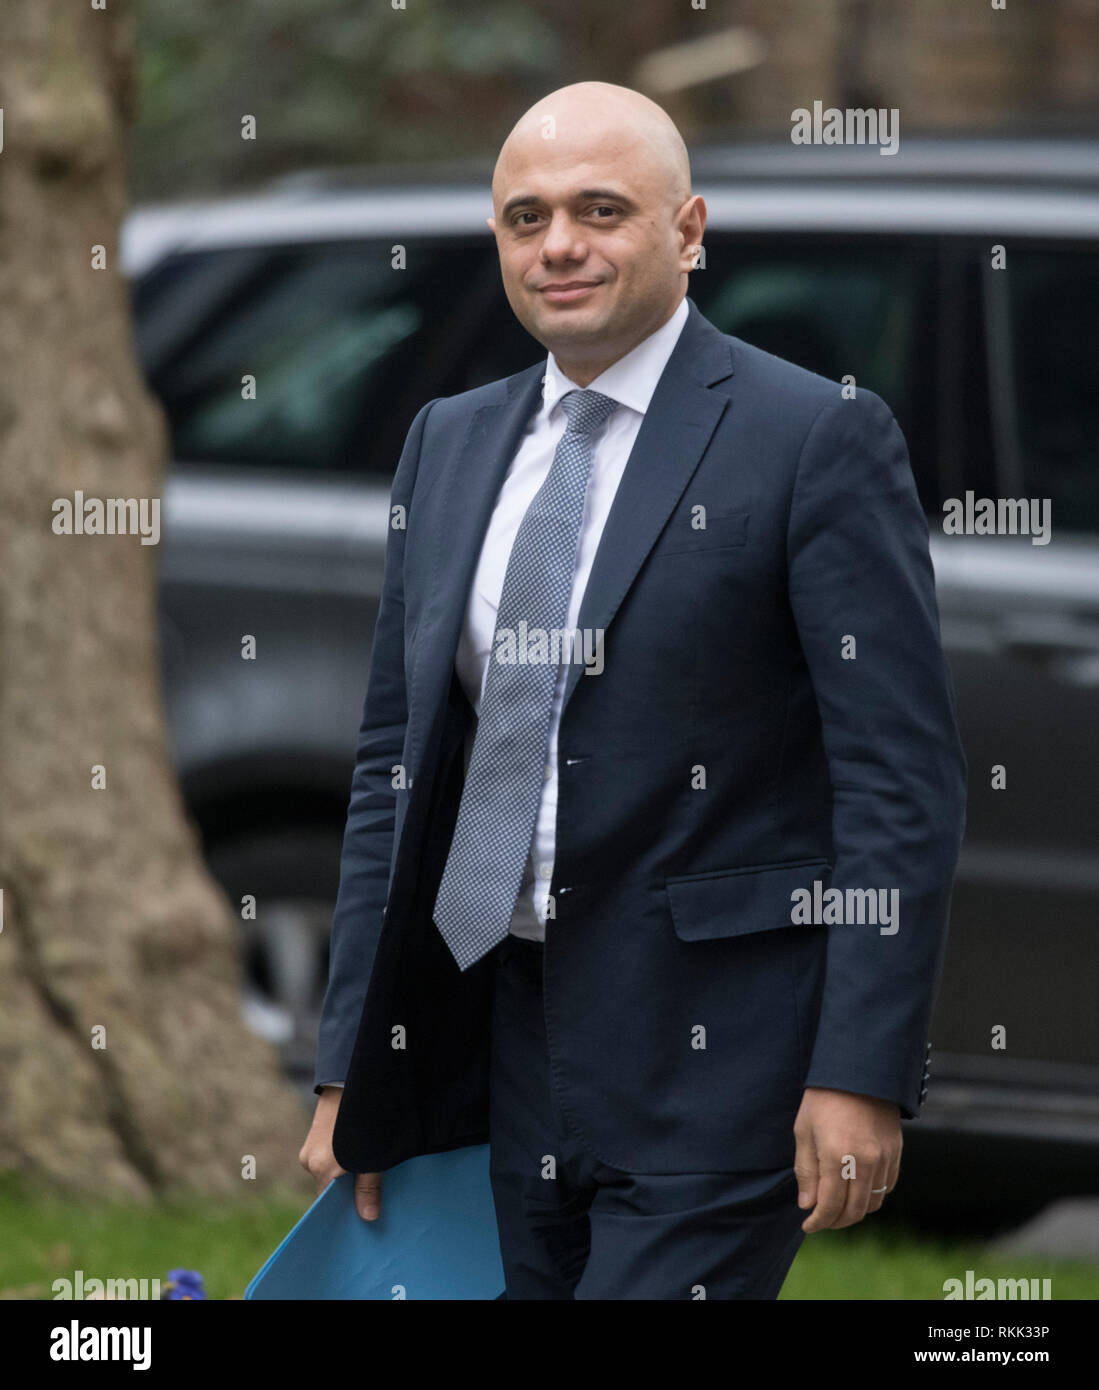 Downing Street, London, UK. 12 February 2019. Government Ministers arrive in Downing Street for weekly cabinet meeting. Sajid Javid, Secretary of State for the Home Department, Home Secretary. Credit: Malcolm Park/Alamy Live News. Stock Photo